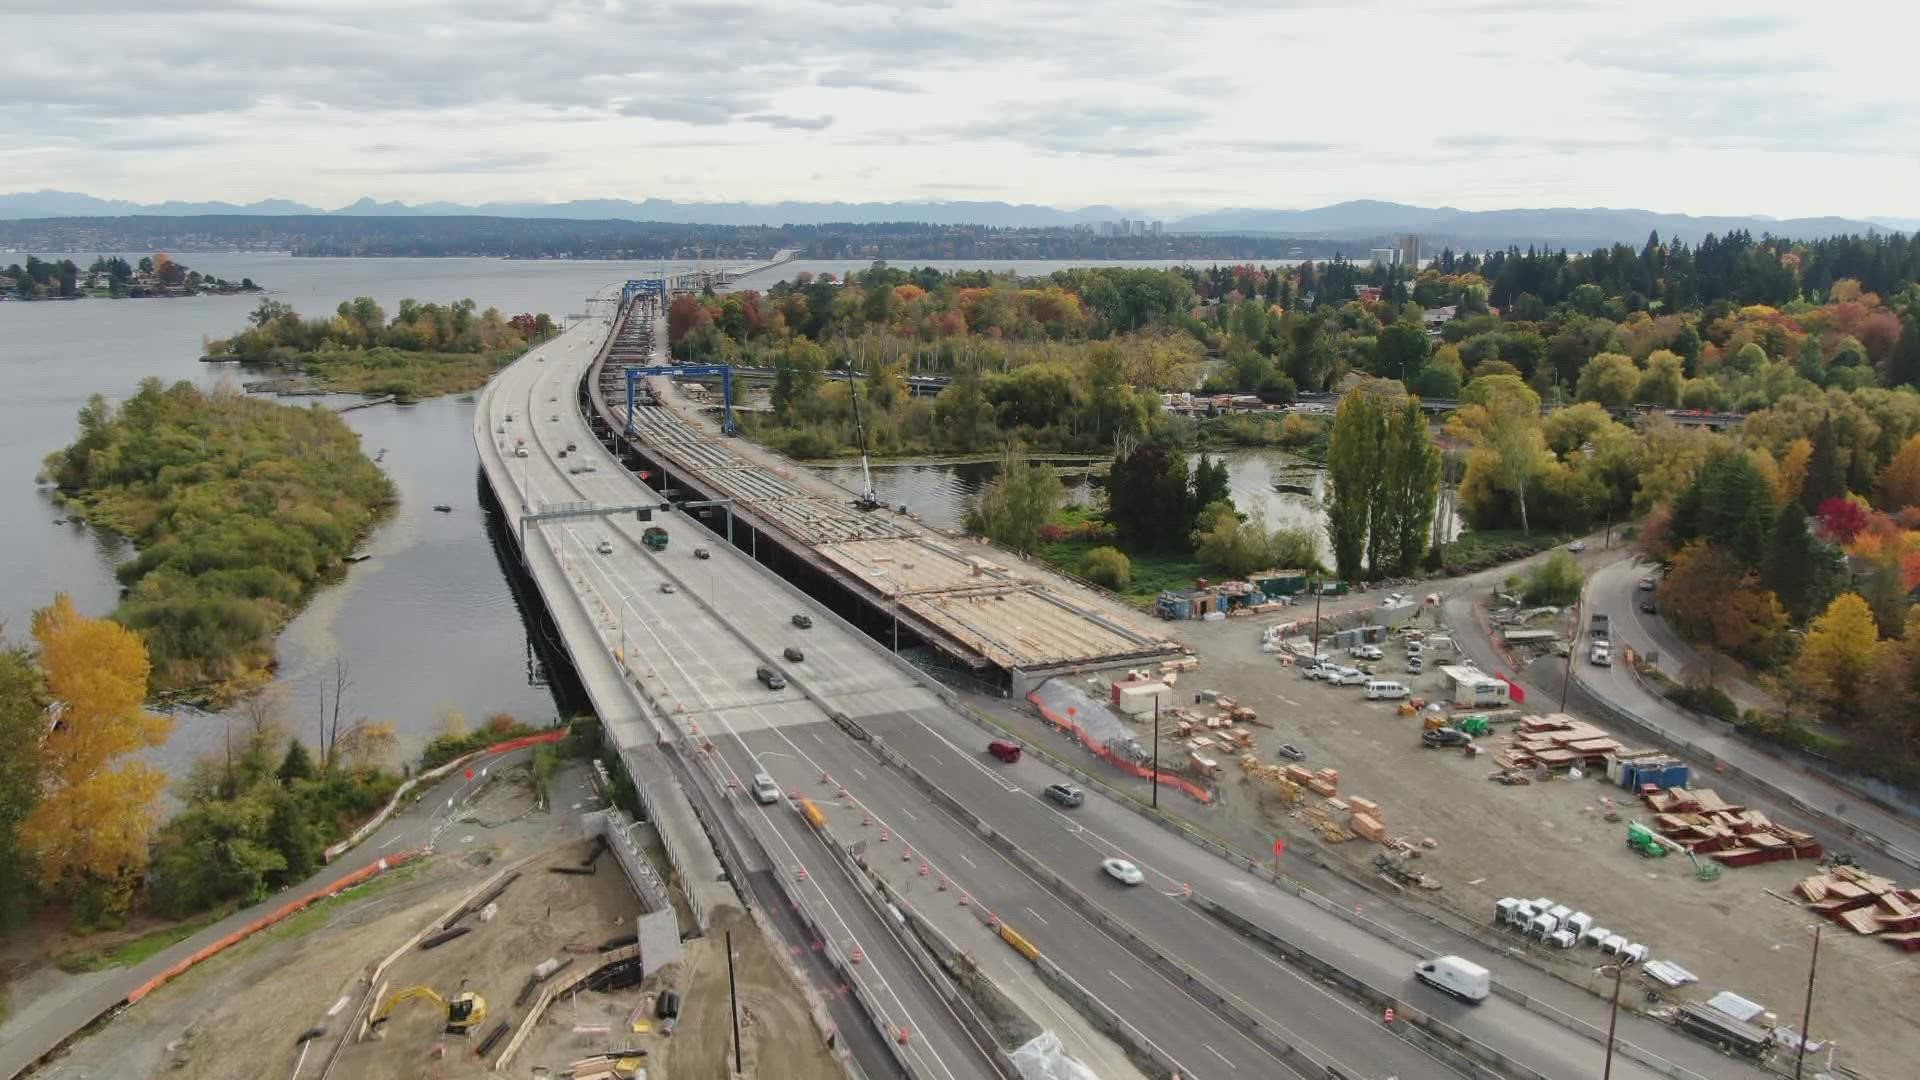 State Route 520 and most ramps will close between Interstate 5 and Medina from Oct. 22 at 9 p.m. to Oct. 25 at 5 a.m.